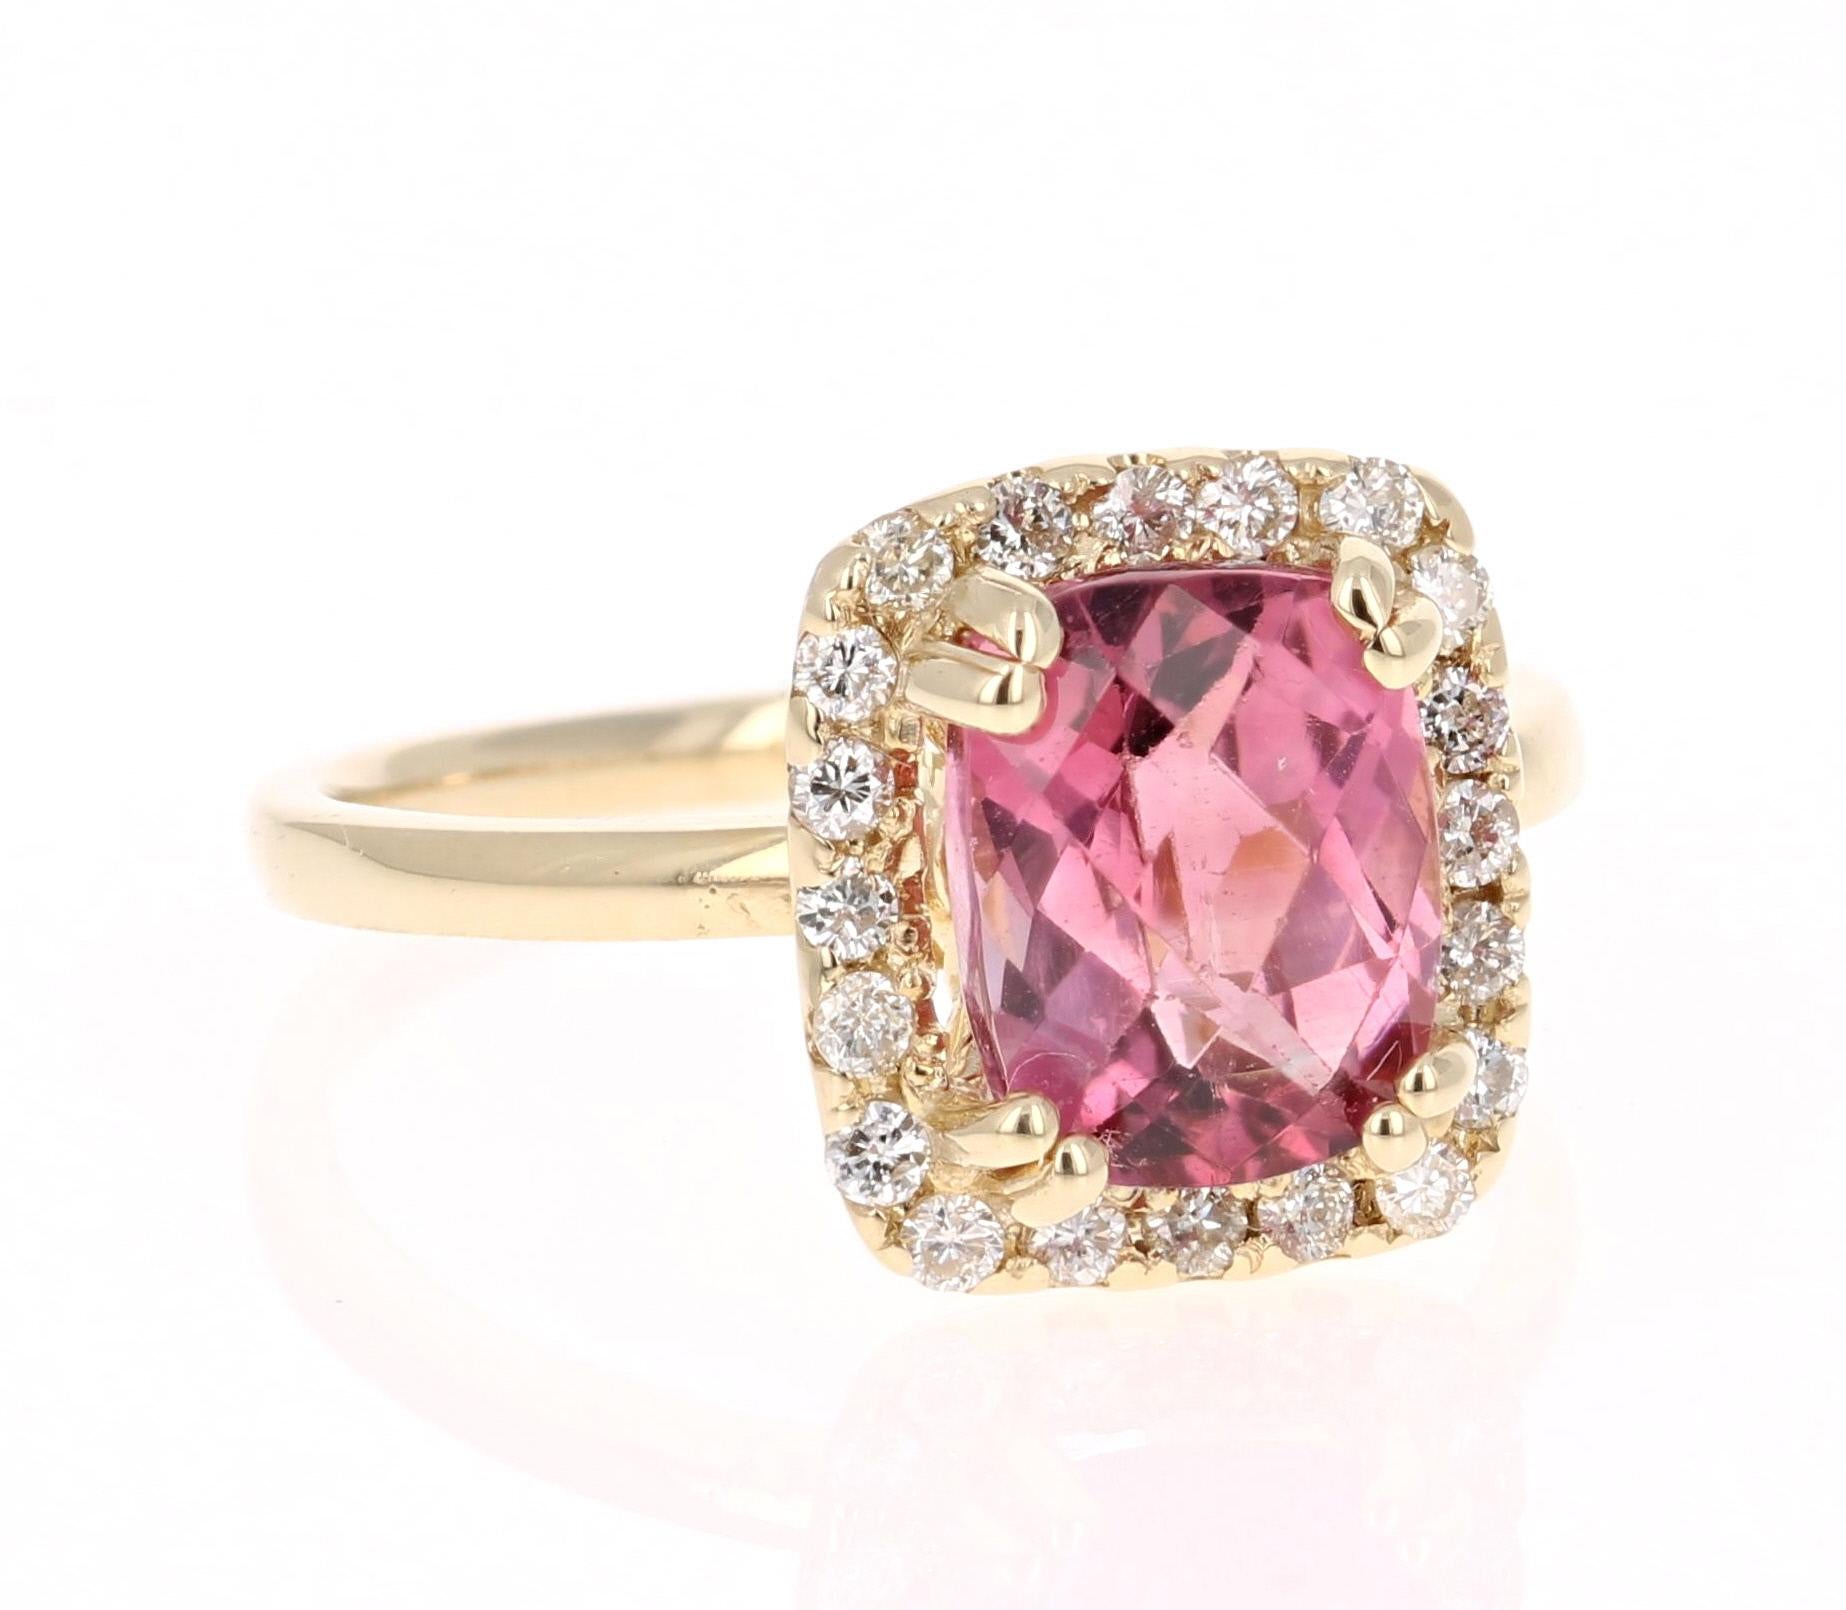 This ring has a Cushion Checkered Cut Pink Tourmaline that weighs 2.57 Carats. Floating around the tourmaline are 21 Round Cut Diamonds weighing 0.29 Carats. (VS/H) 
The total carat weight of the ring is 2.86 Carats. 
The measurements of the